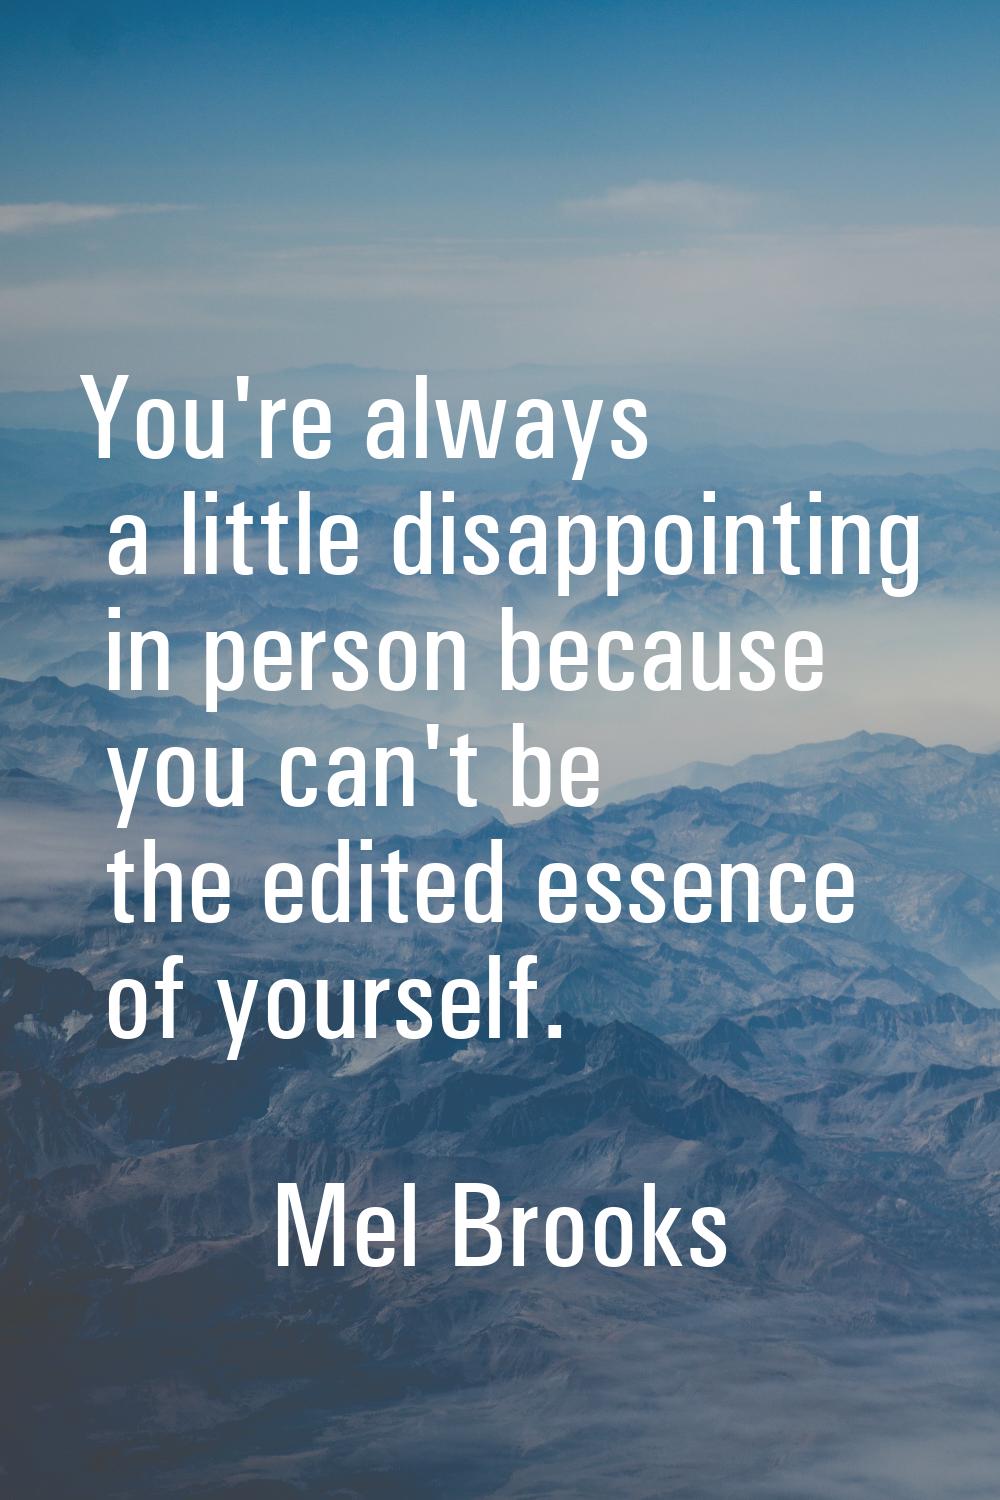 You're always a little disappointing in person because you can't be the edited essence of yourself.